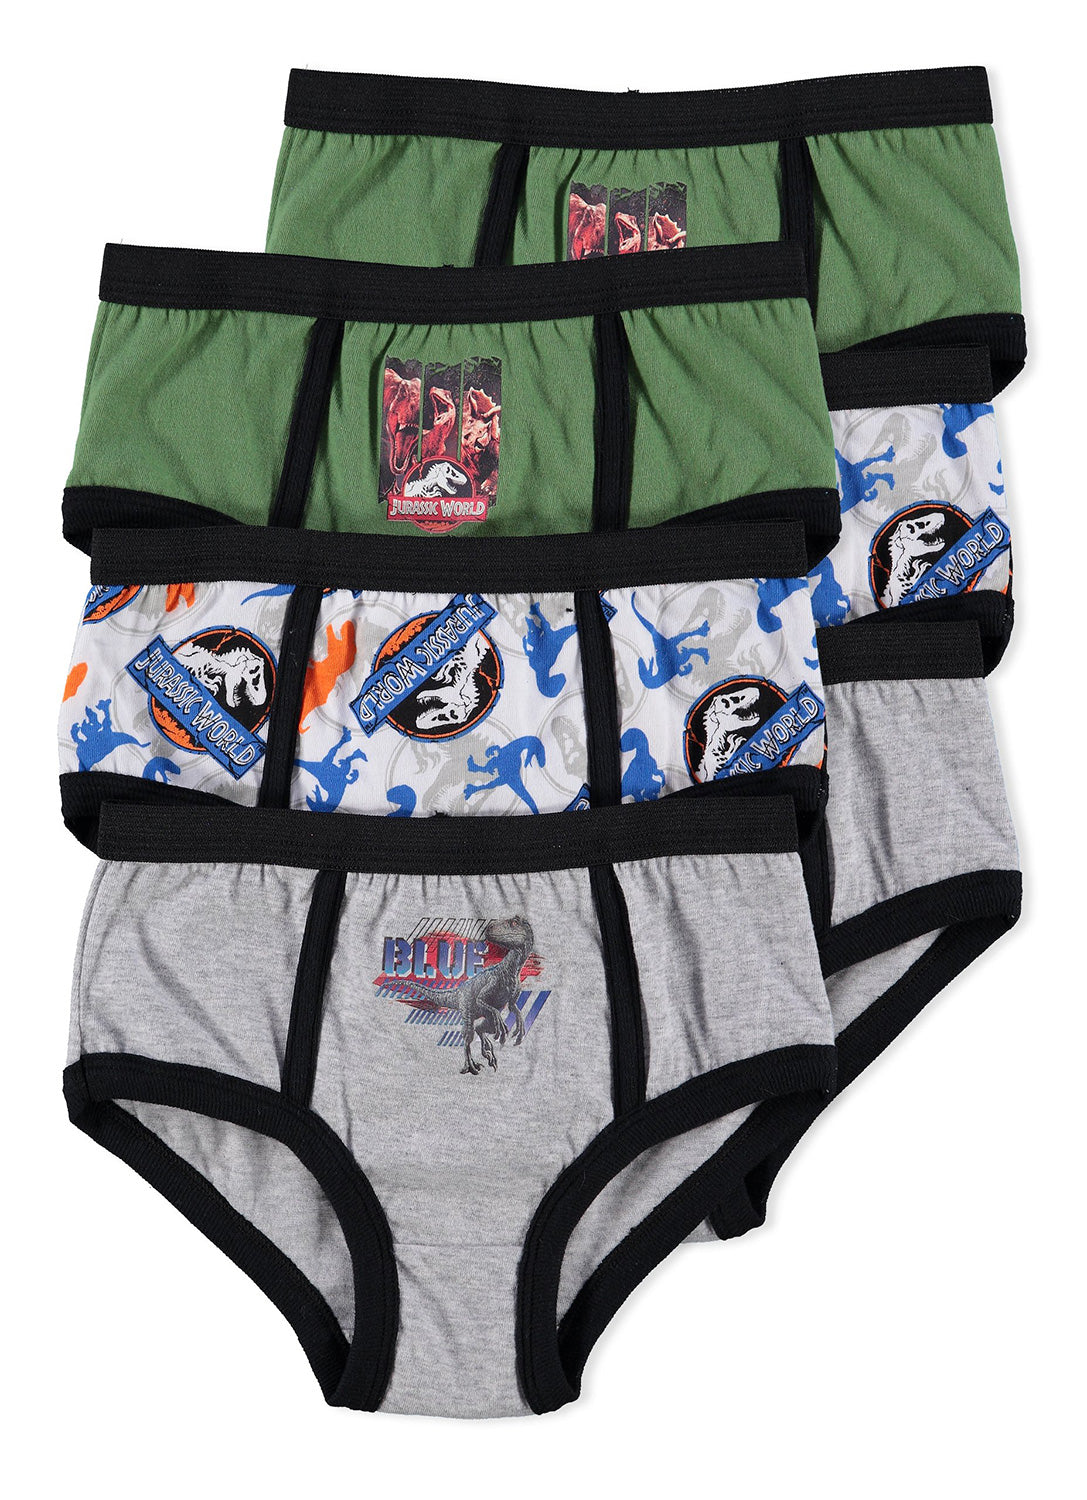 6 Underwear briefs for Boys in 3 colours with Jurassic World 2 prints